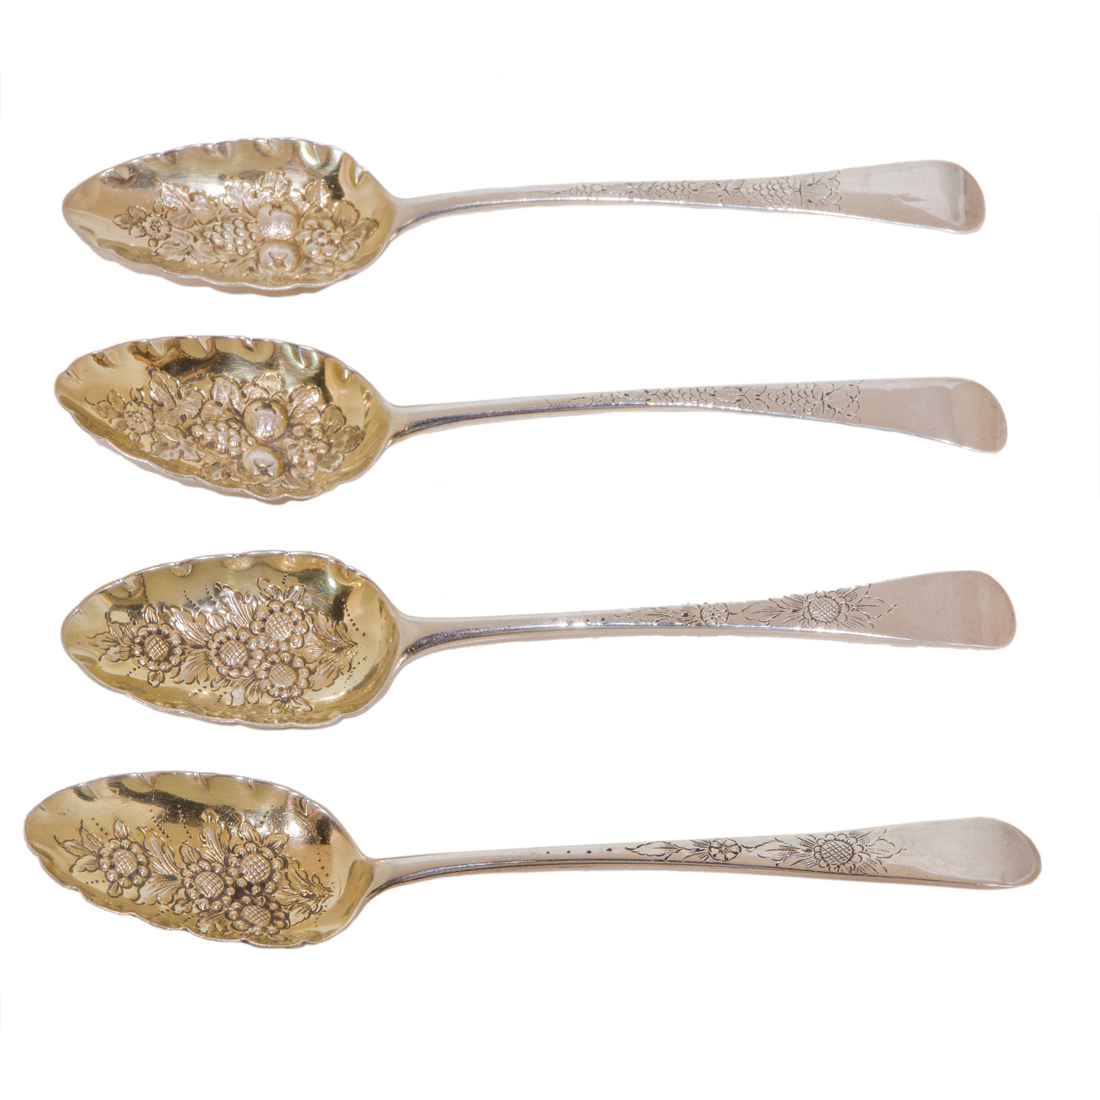 A SET OF 4 ENGLISH BERRY SPOONS 3a2b56